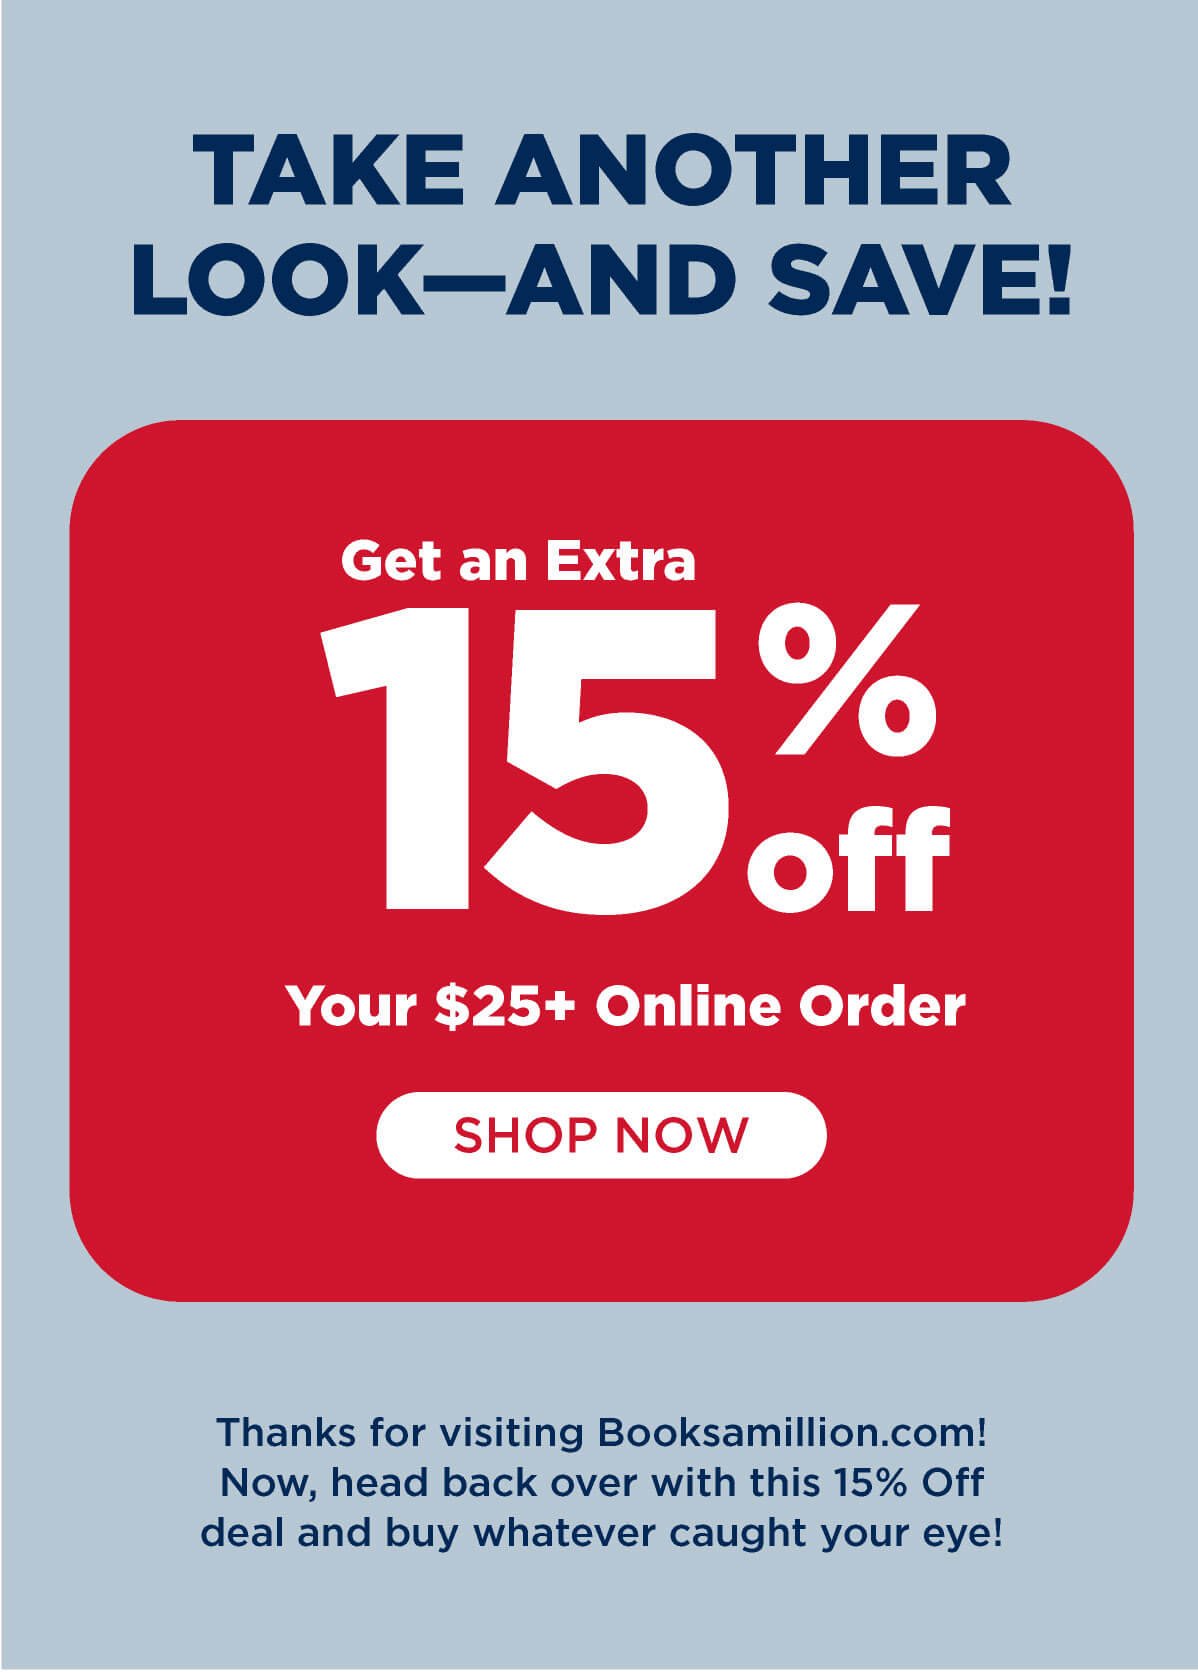 Take Another Look and Save! Get an EXTRA 15% OFF your \\$25+ online order! Shop Now. Thanks for visiting Booksamillion.com!